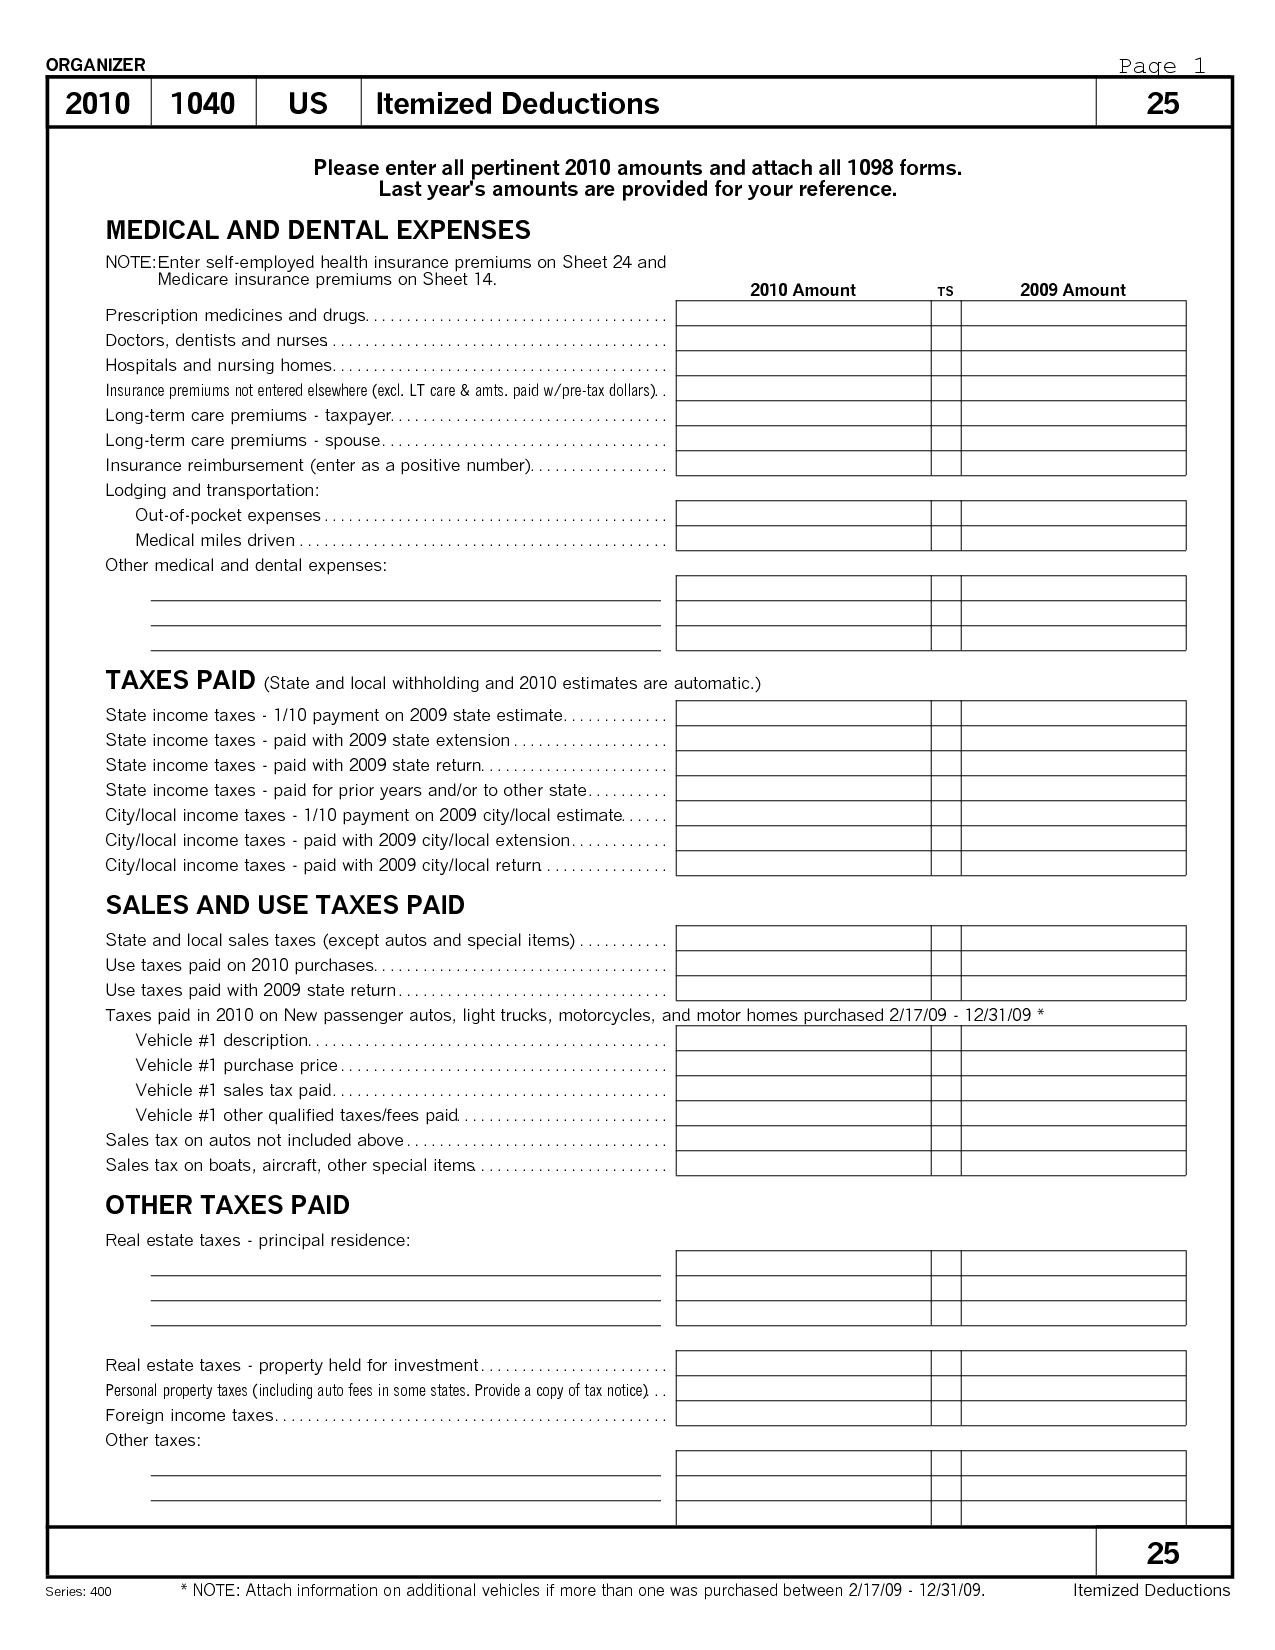 16 Best Images of Budget Worksheet Self-Employed - Make a ...